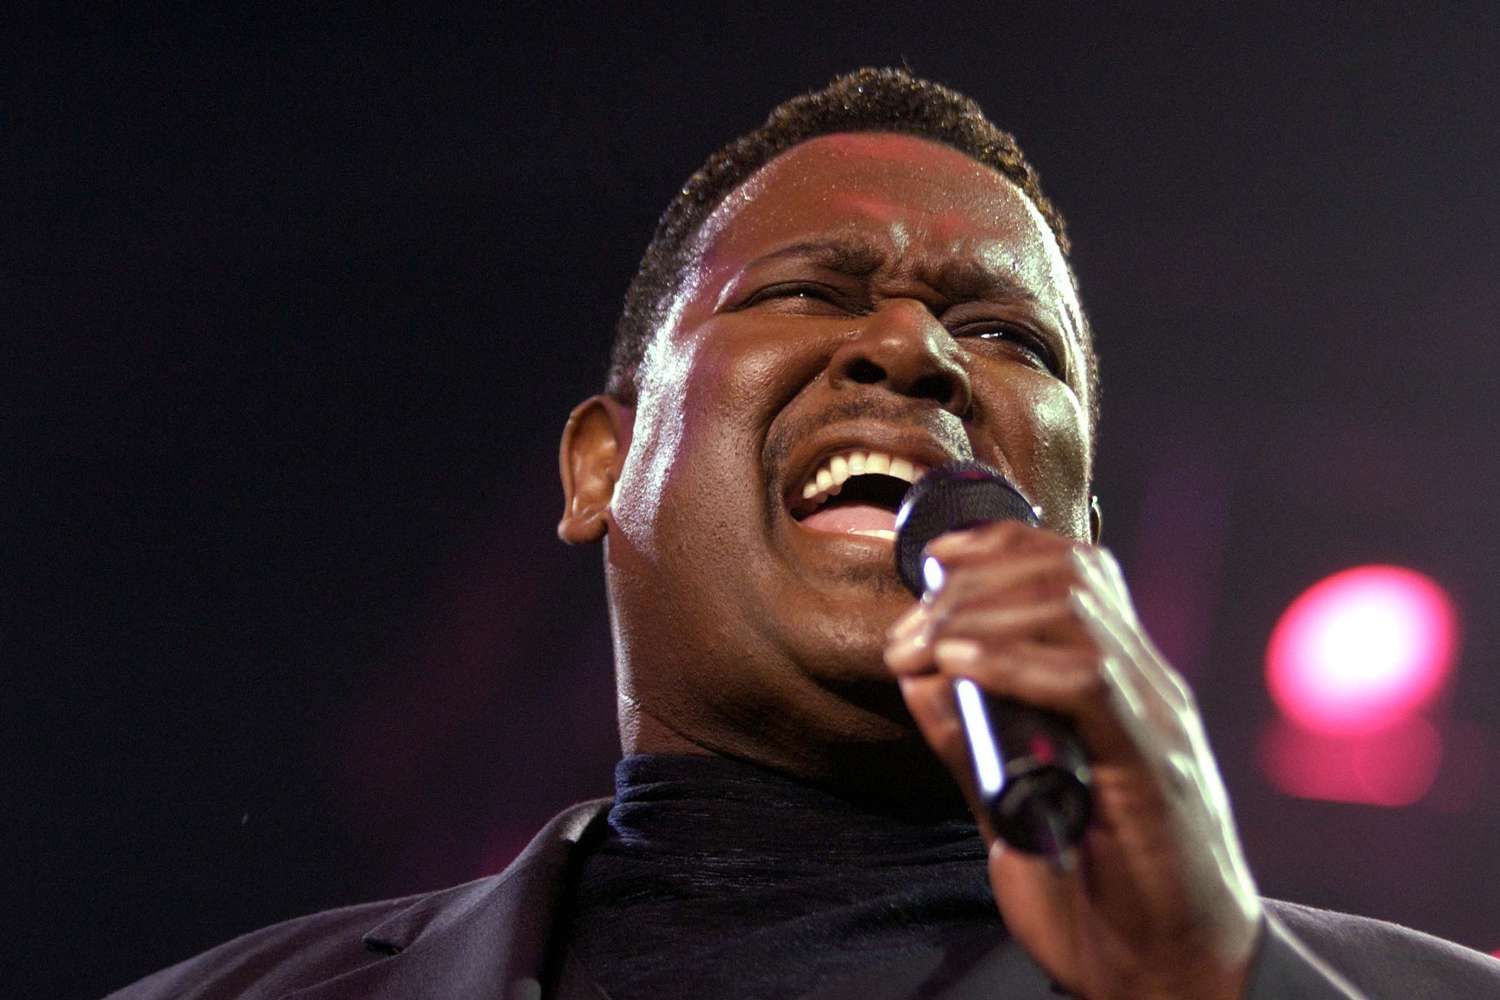 Singer Luther Vandross performs at the Mandalay Bay Resort September 20, 2002 in Las Vegas, Nevada. Vandross, 51, a five-time Grammy winner, suffered a stroke April 16 and is undergoing medical treatment according to a statement issued by his record label